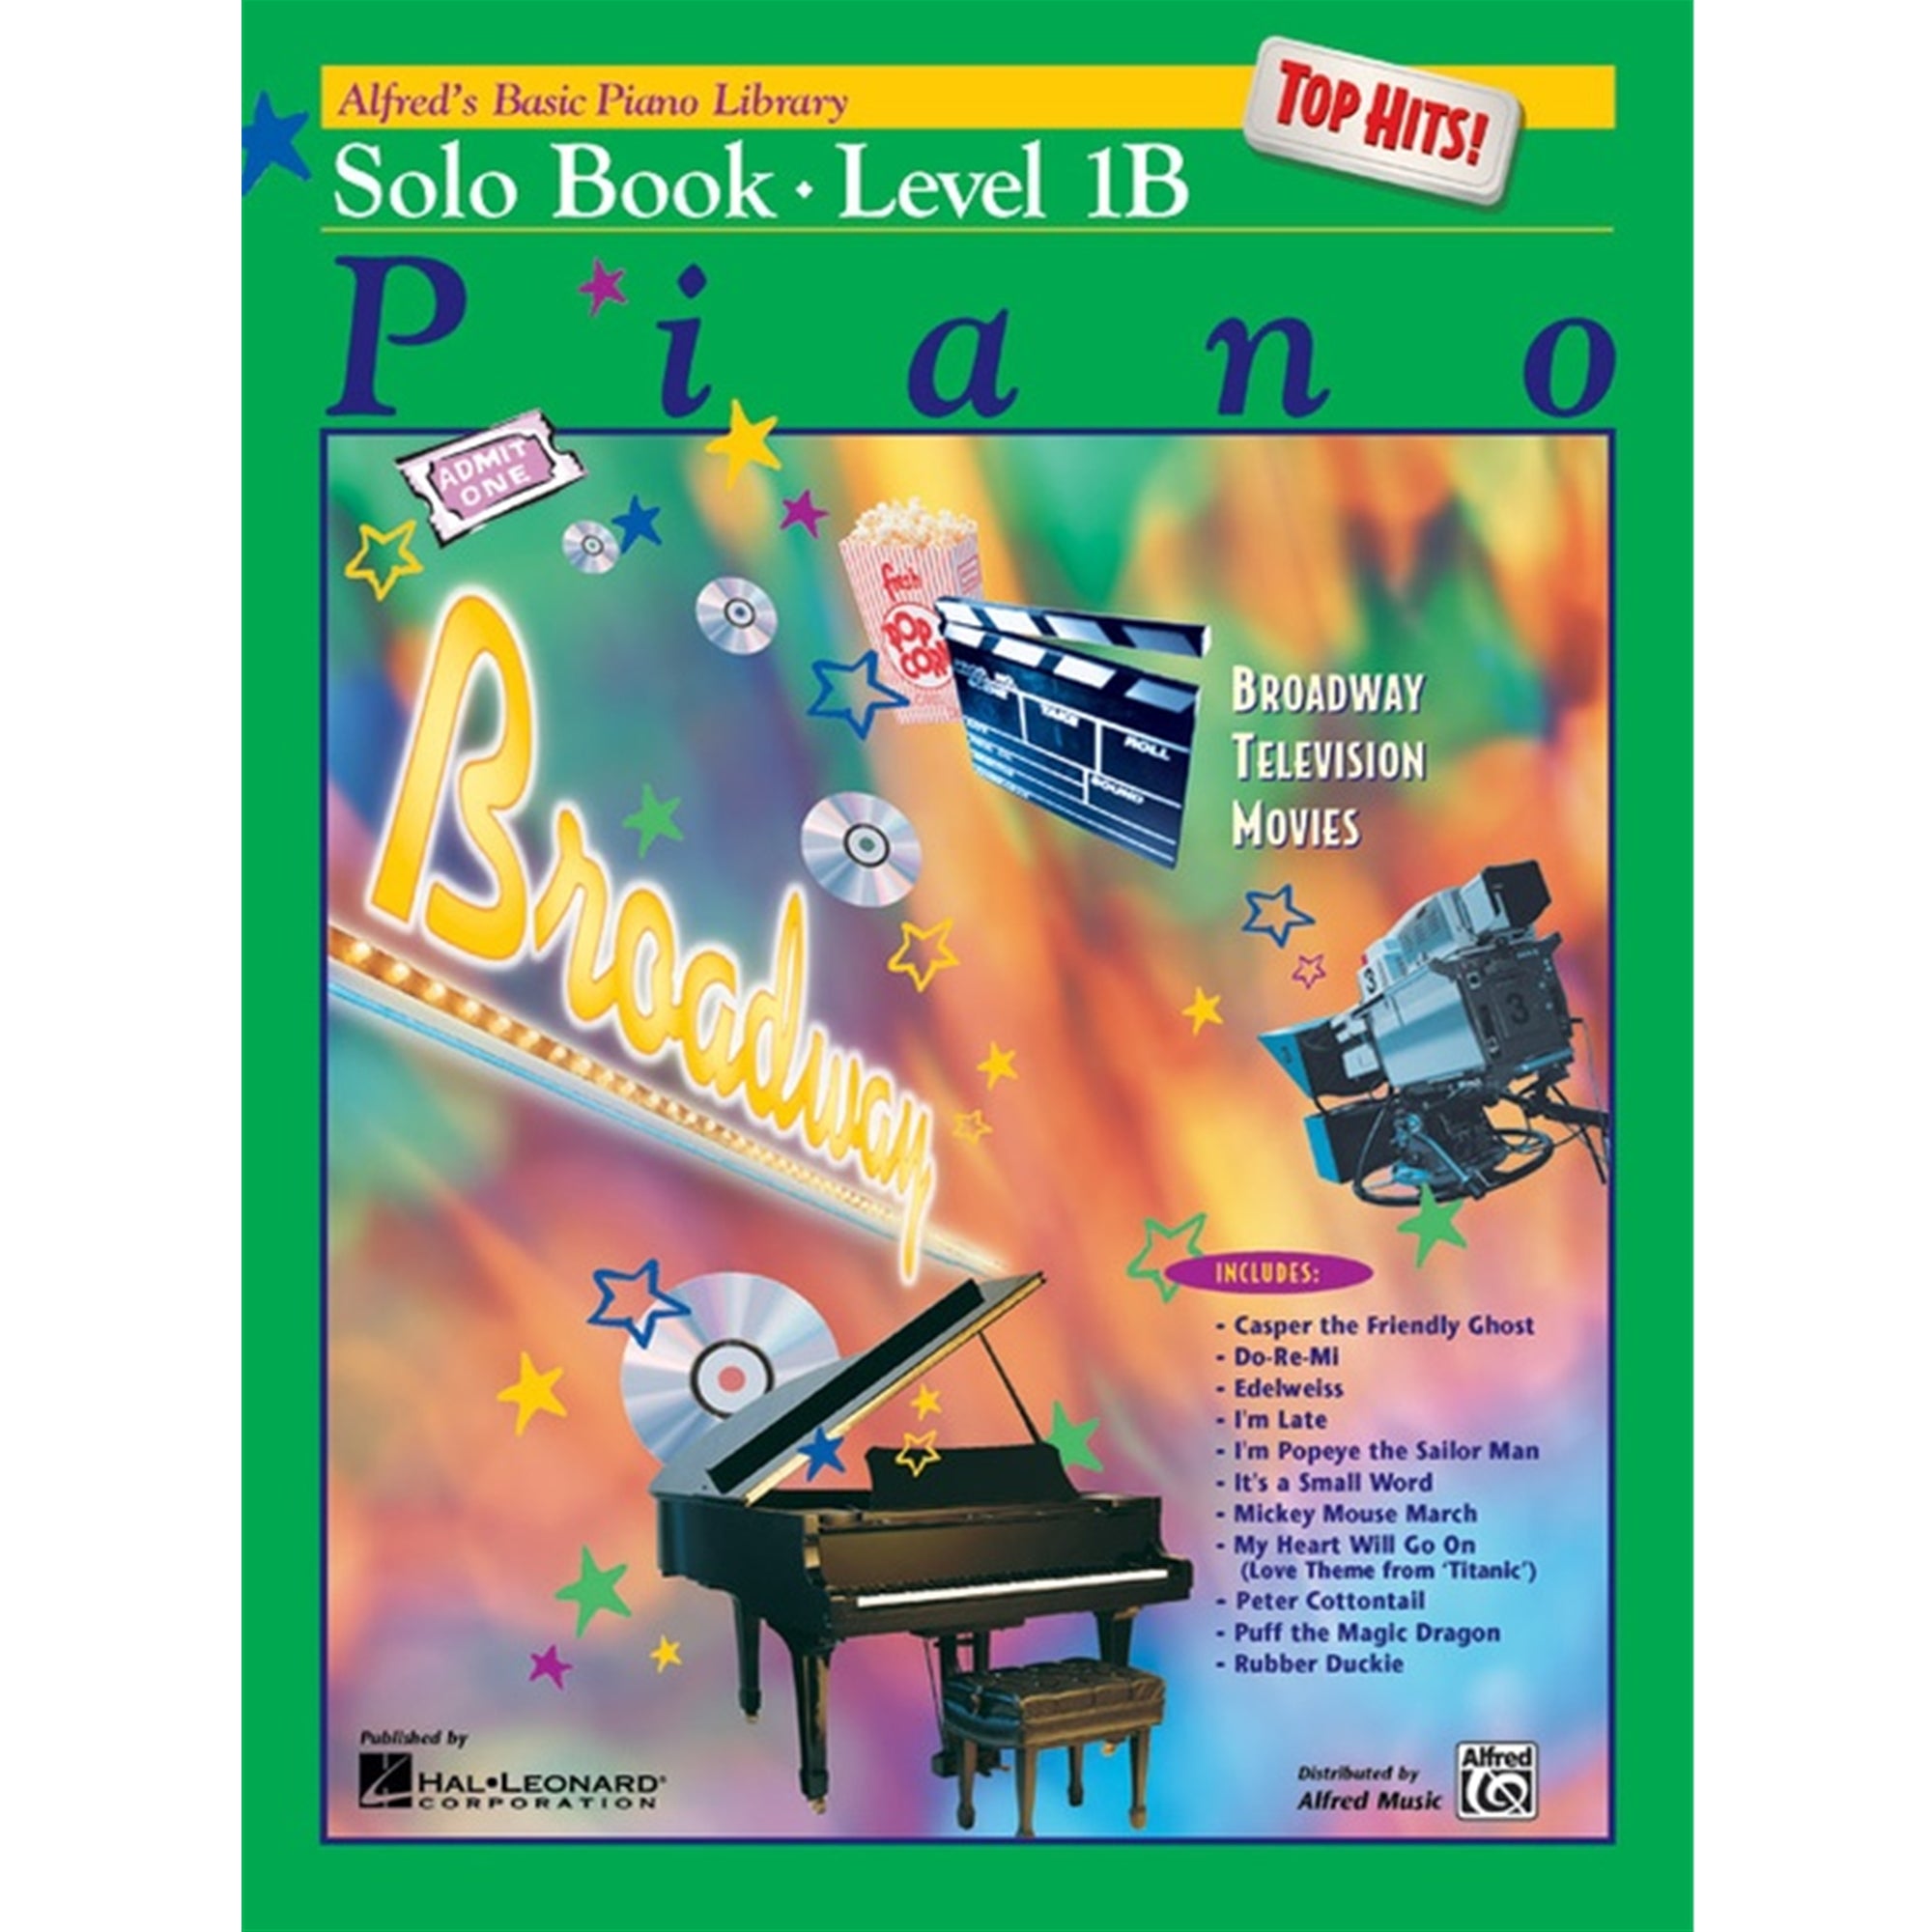 ALFRED 16496 Alfred's Basic Piano Library: Top Hits! Solo Book 1B